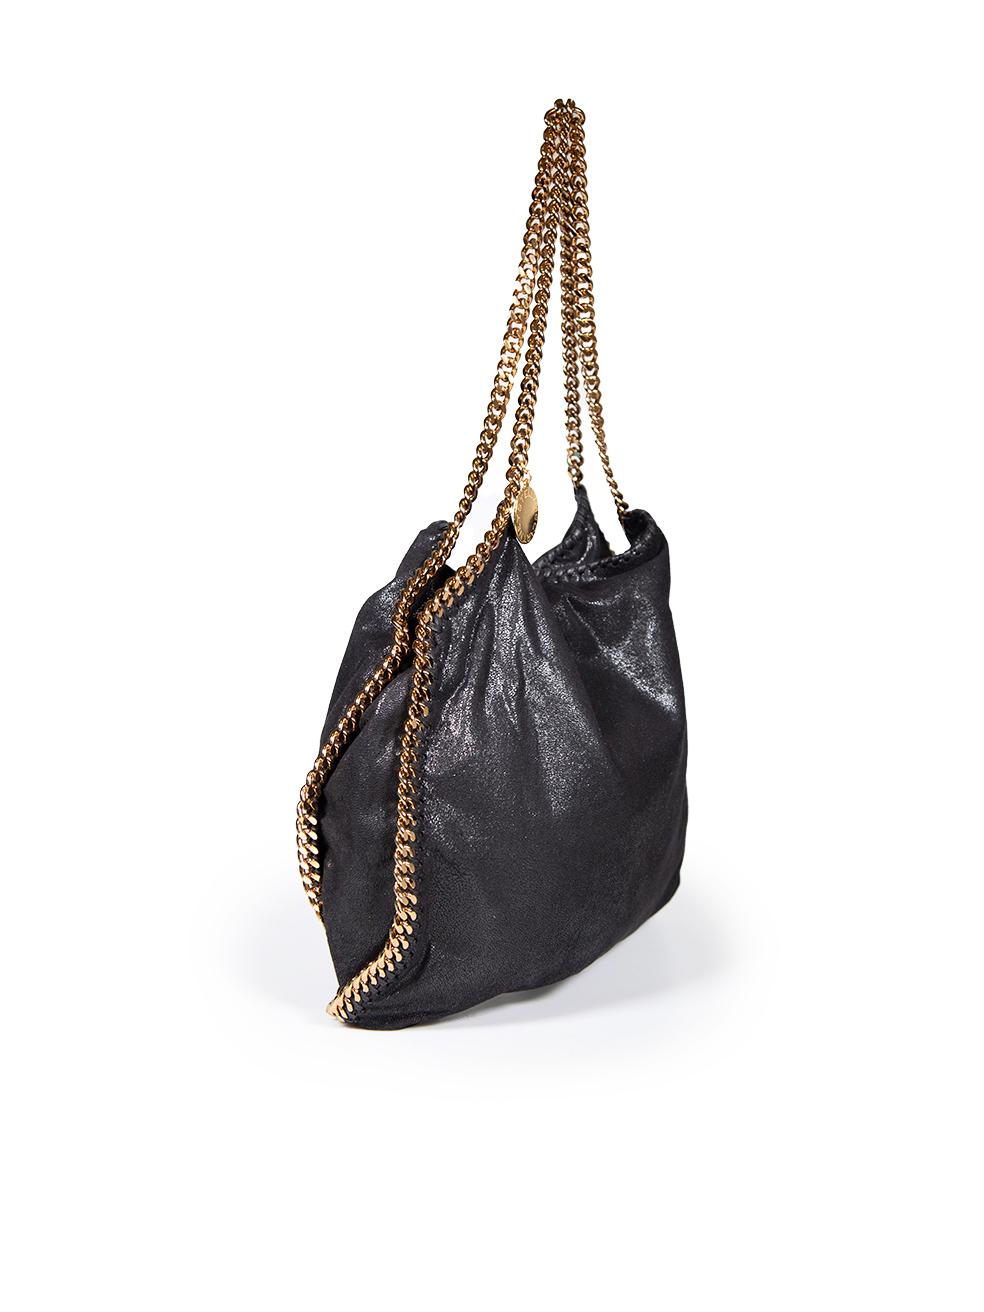 CONDITION is Very good. Minimal wear to tote is evident. Minimal scratch marks on the inside around the zip on this used Stella McCartney designer resale item.
 
 
 
 Details
 
 
 Model: Falabella
 
 Black
 
 Faux suede
 
 Medium tote bag
 
 Gold